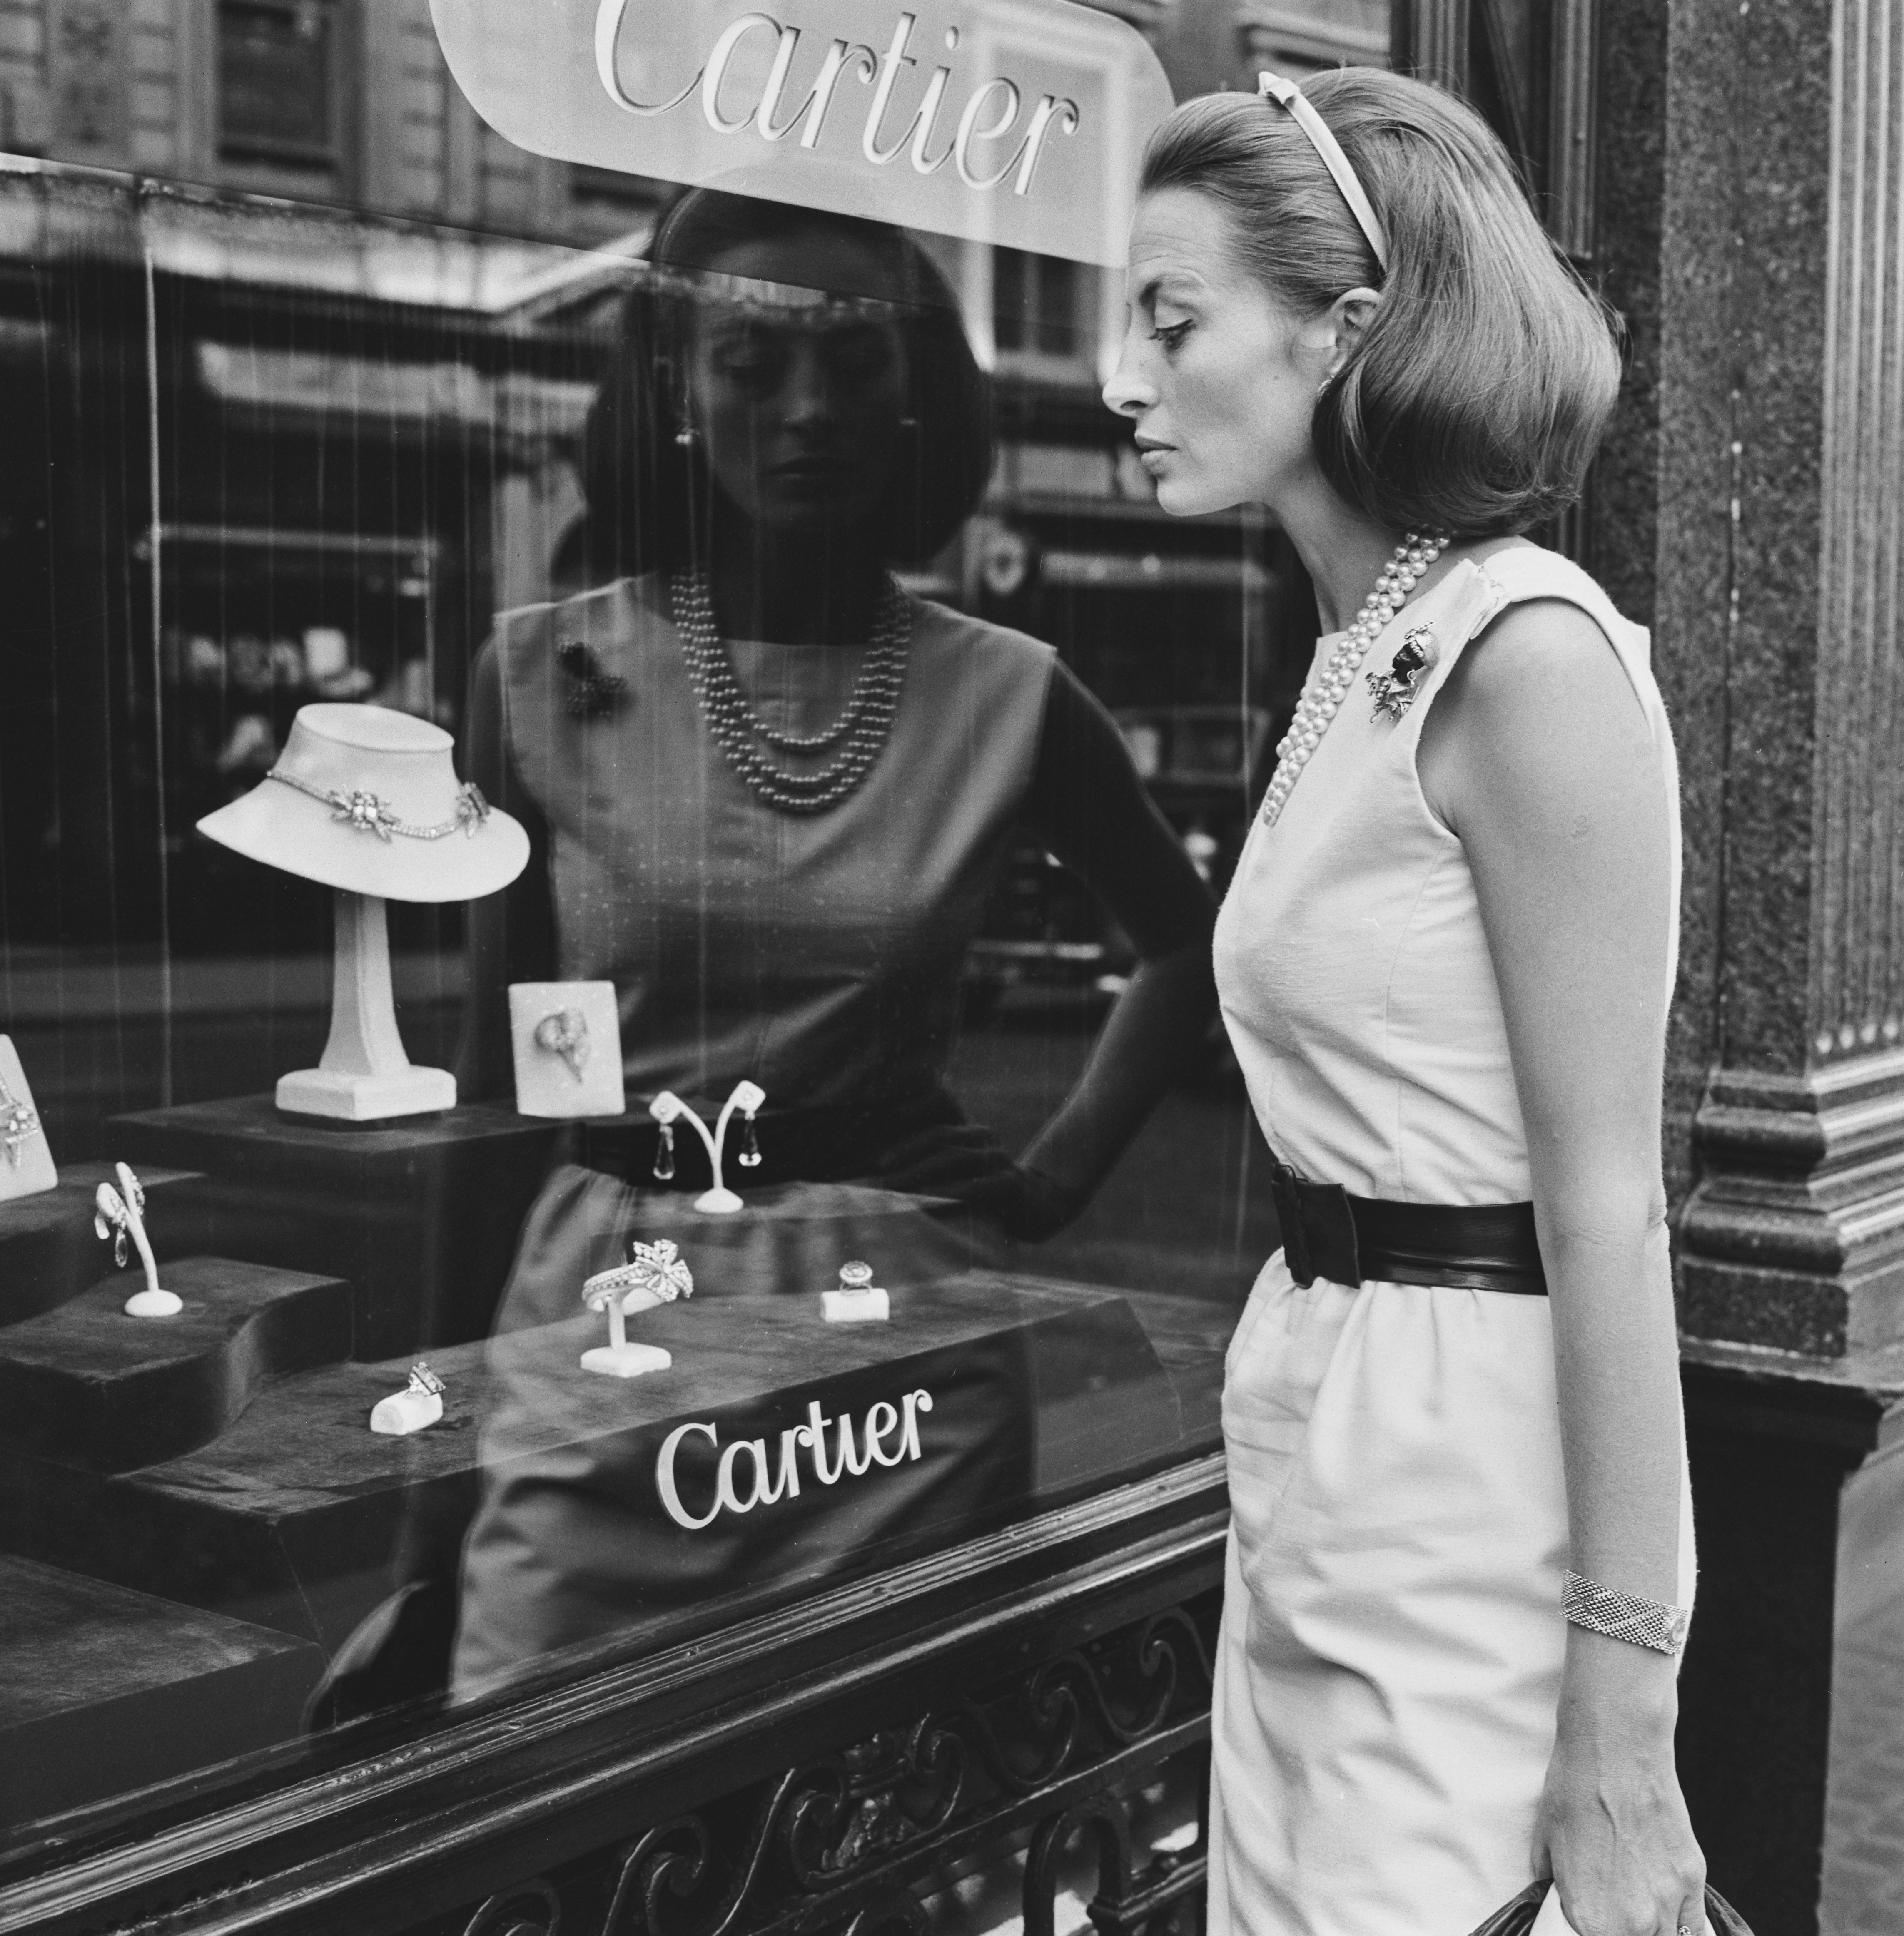 French actress Capucine (1928 - 1990) window shopping at the Cartier jewellery store on Old Bond Street in London, UK, 10th August 1964. (Photo by Evening Standard/Hulton Archive/Getty Images)